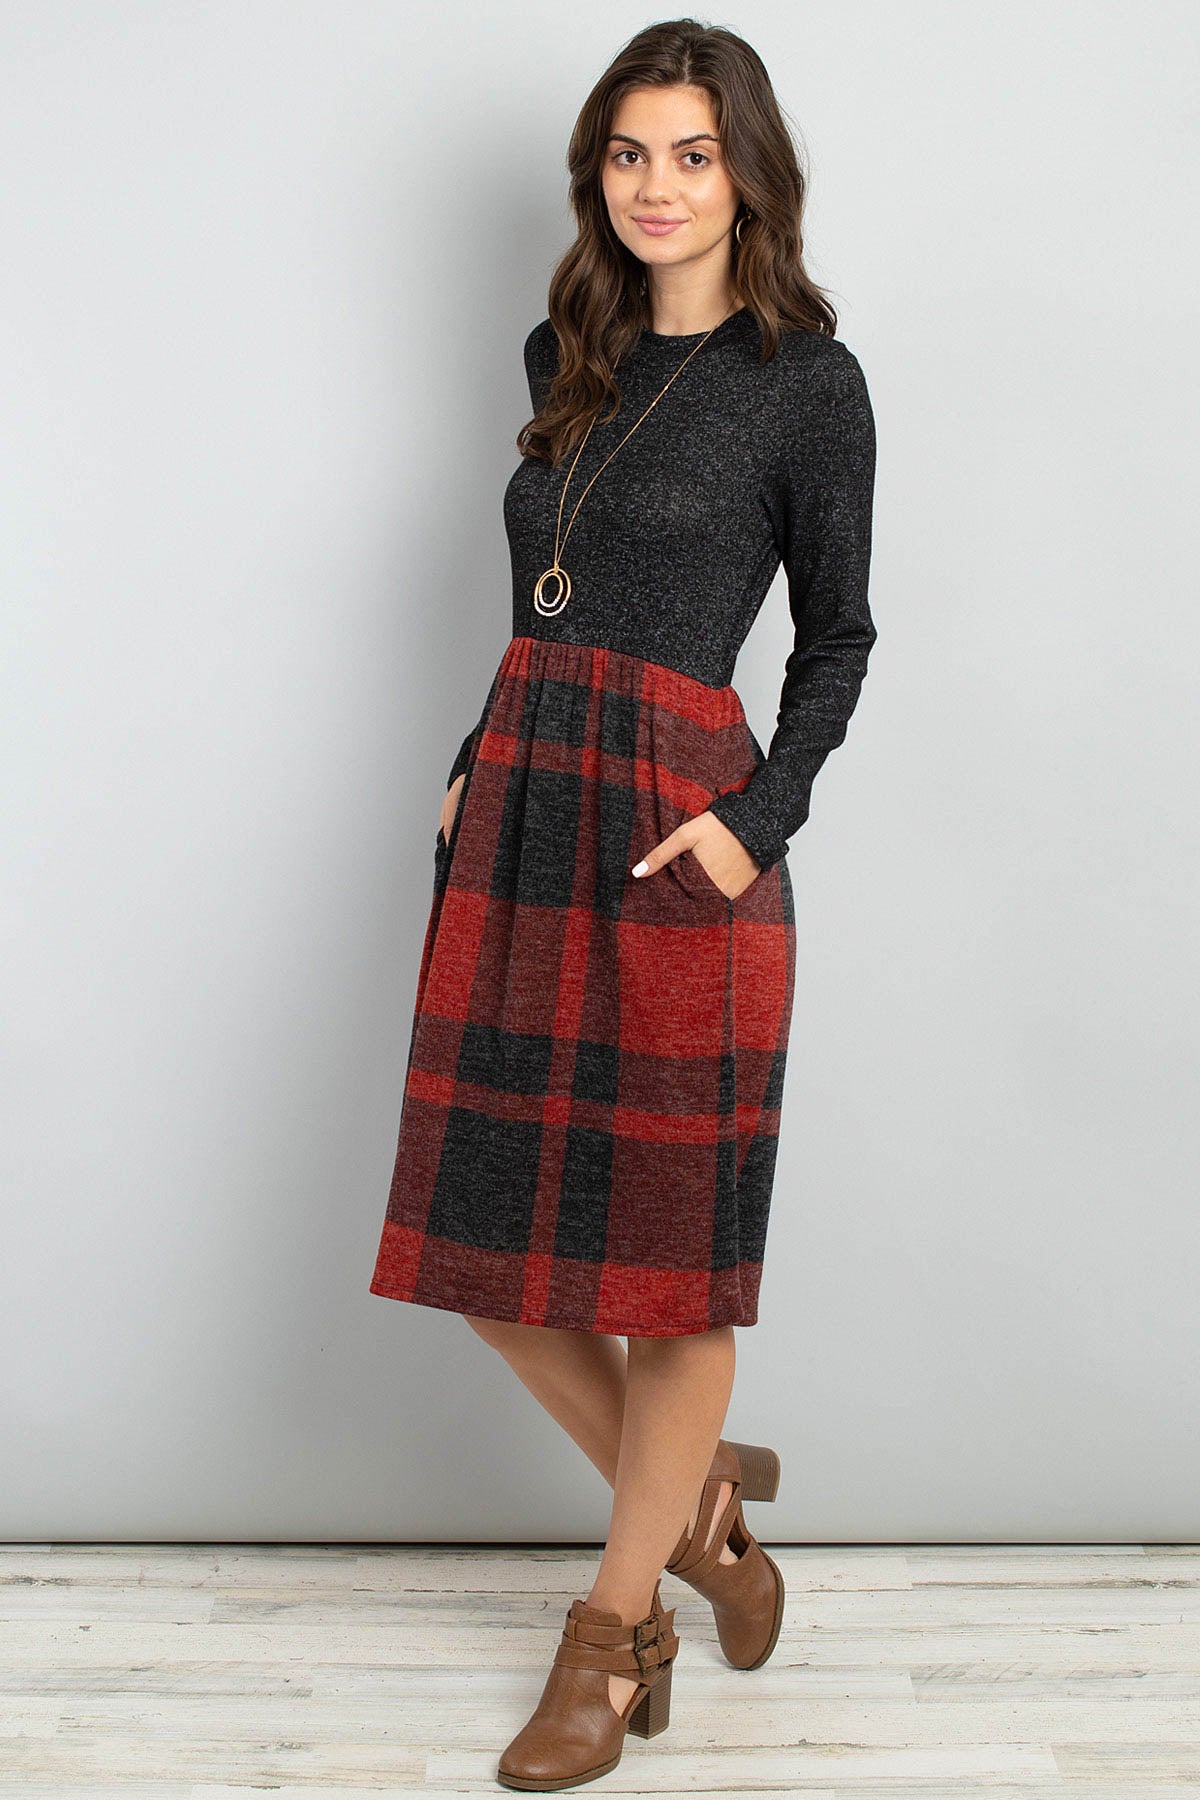 Shop Two Toned High Neck Long Sleeves Plaid Contrast Dress, dresses, USA Boutique